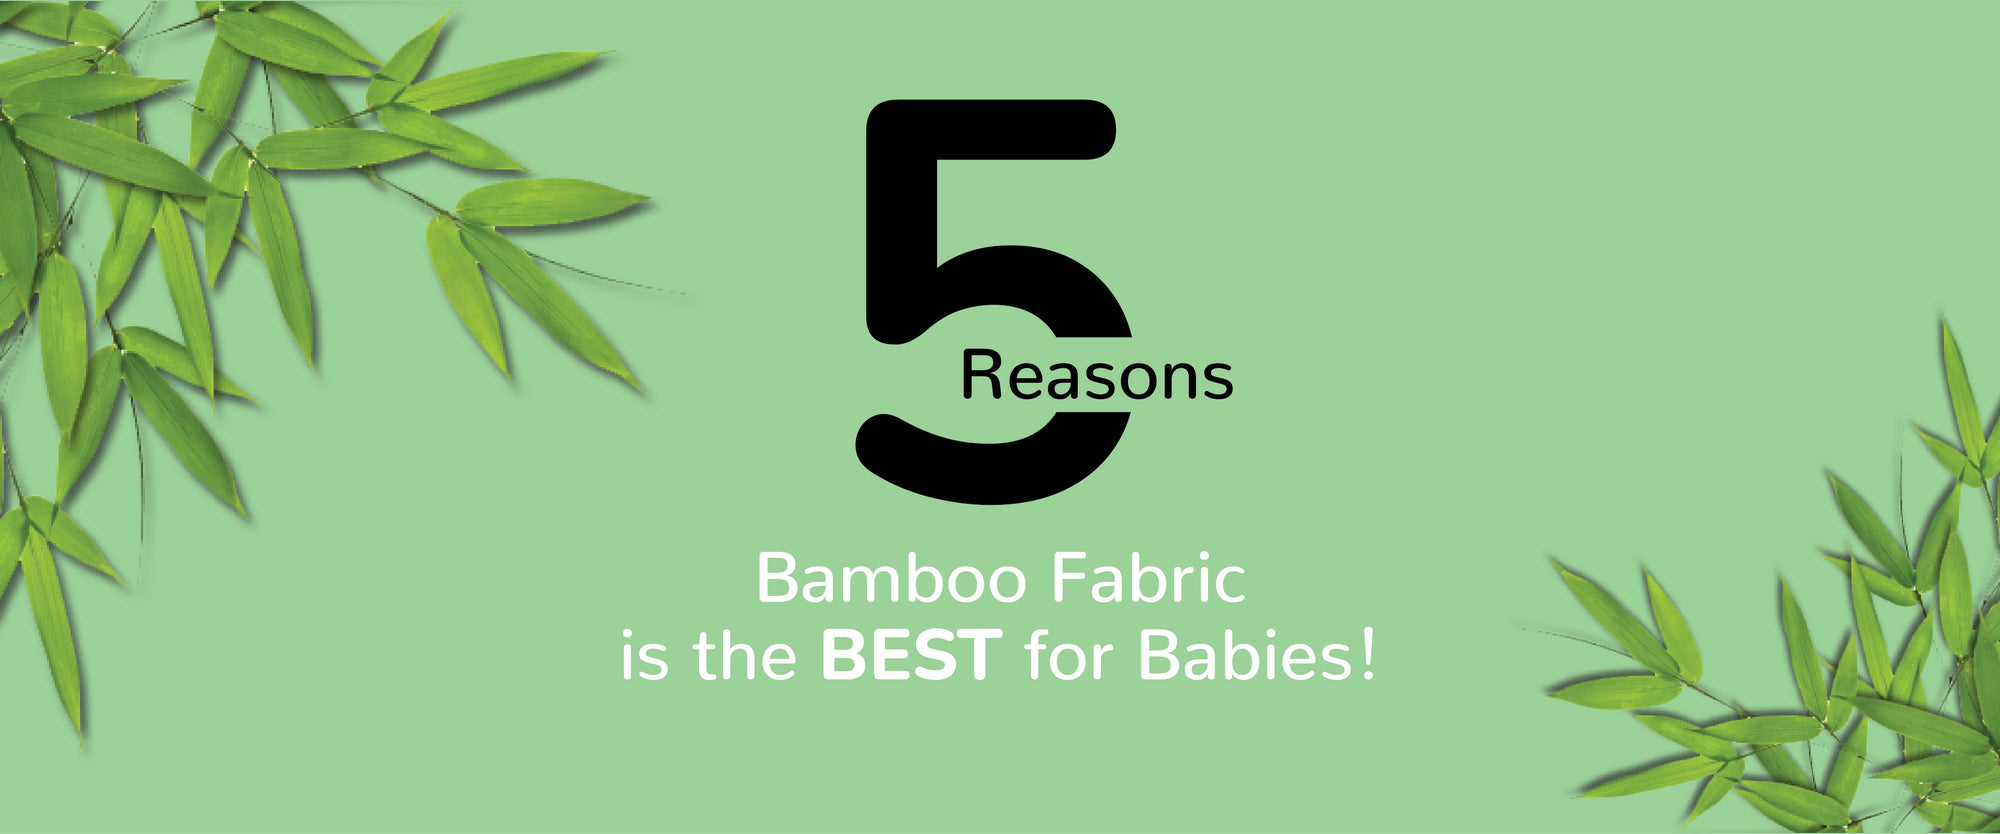 5 Reasons Bamboo Fabric is the BEST for Babies!